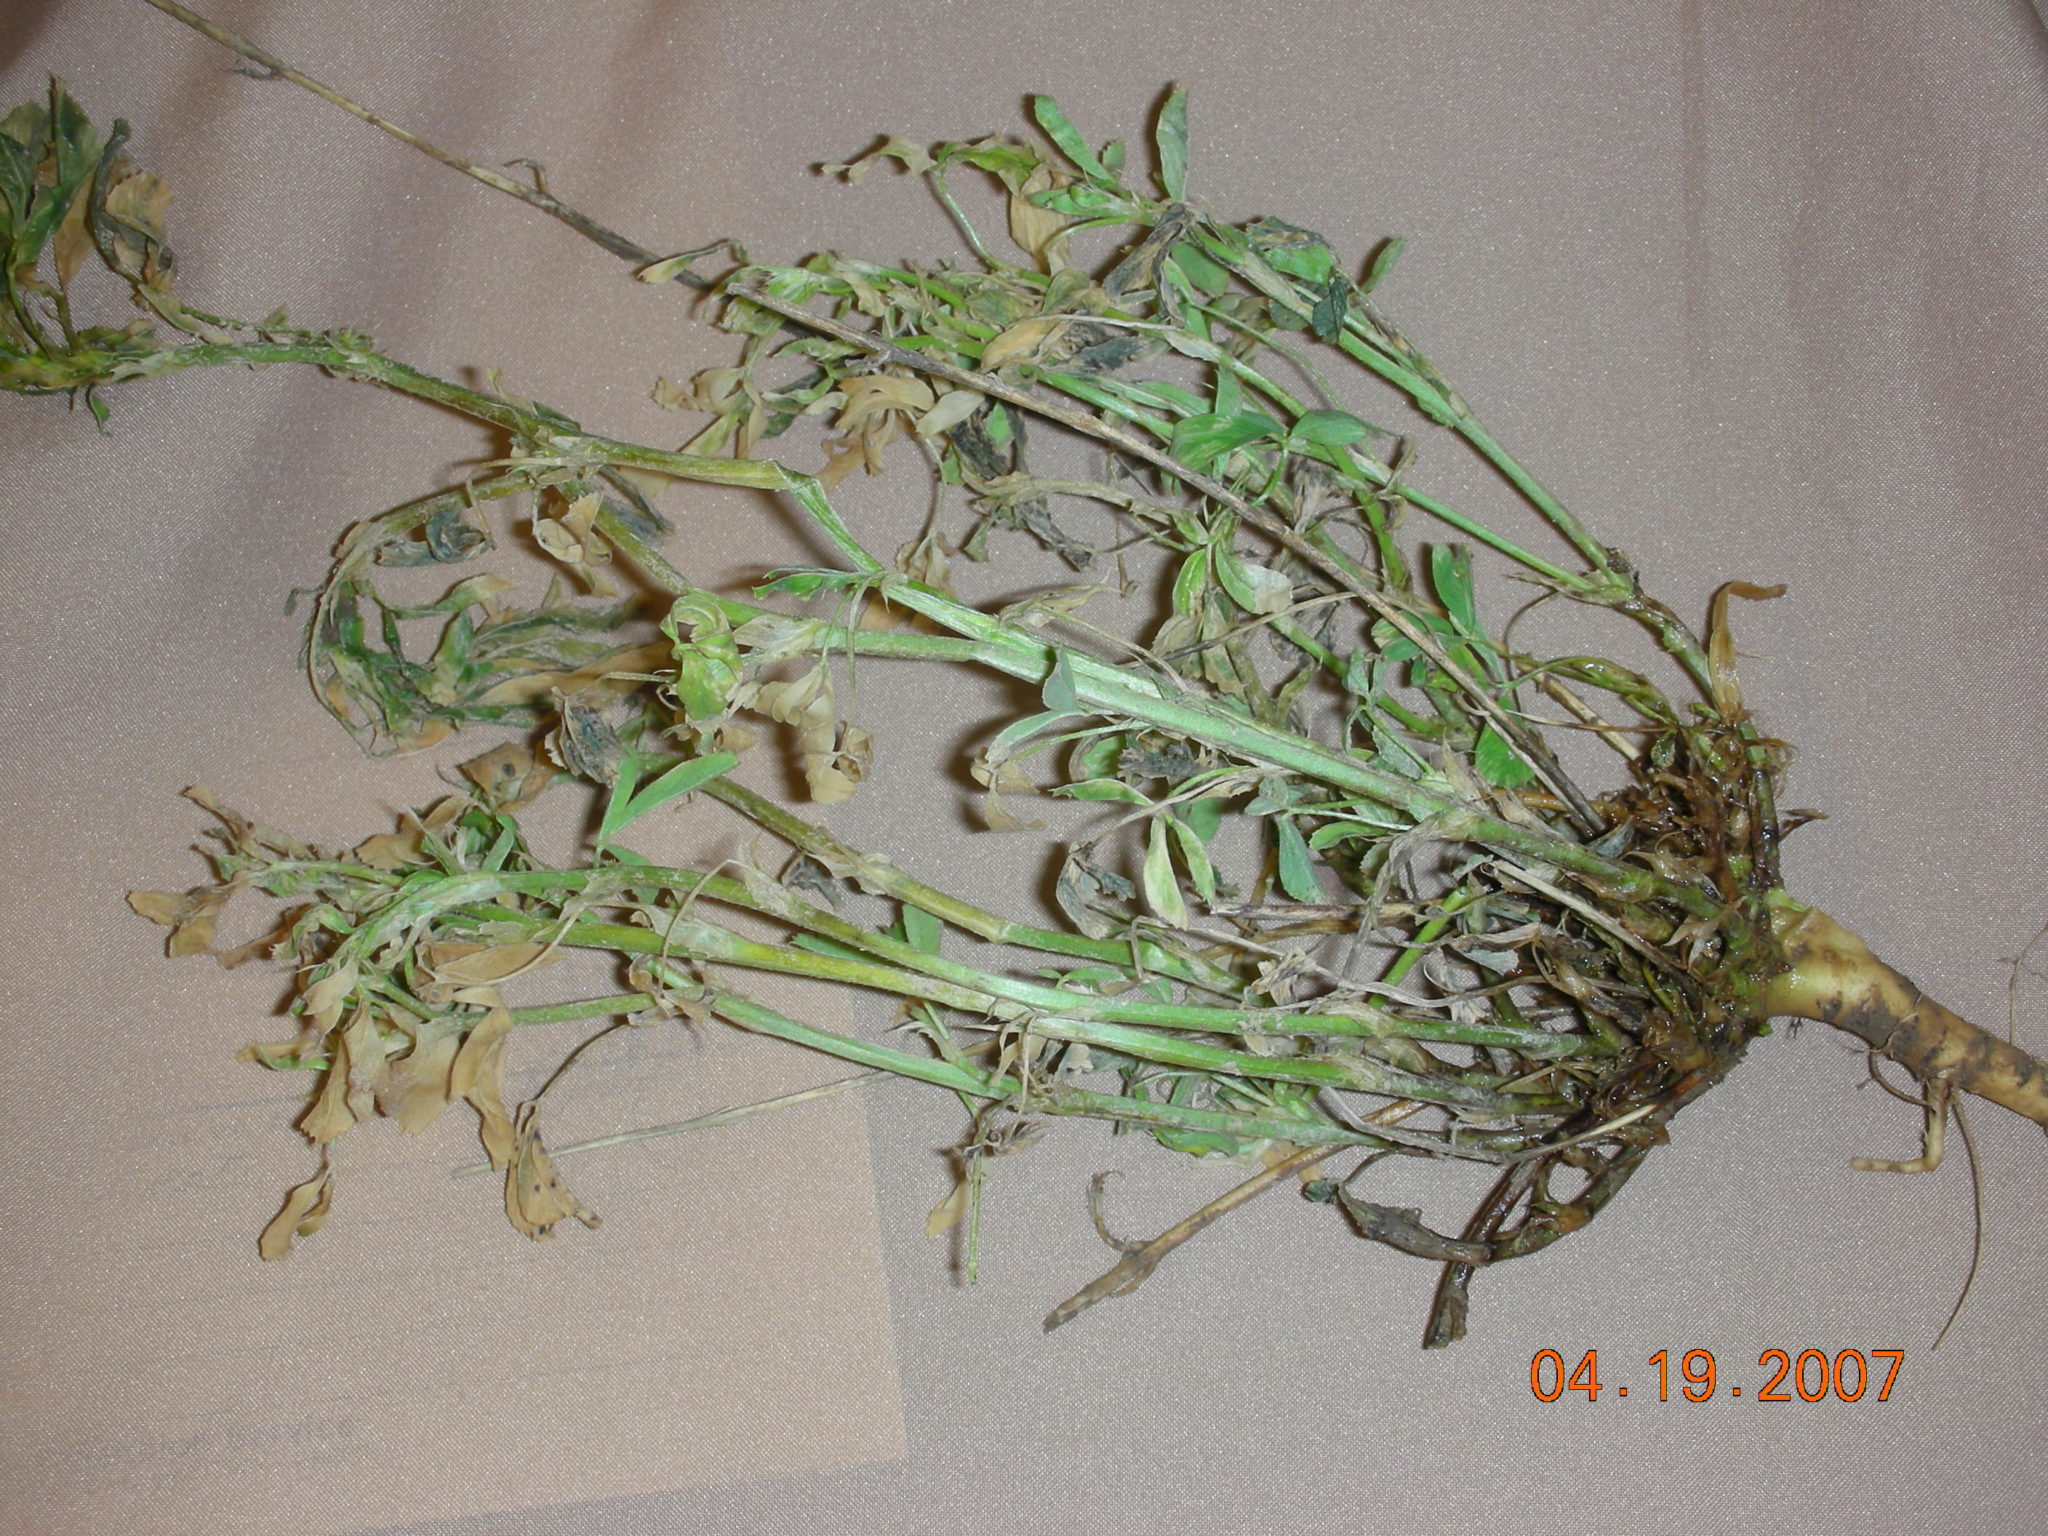 Alfalfa will lose its upright integrity and appear water soaked (mushy) with severe freeze damage.